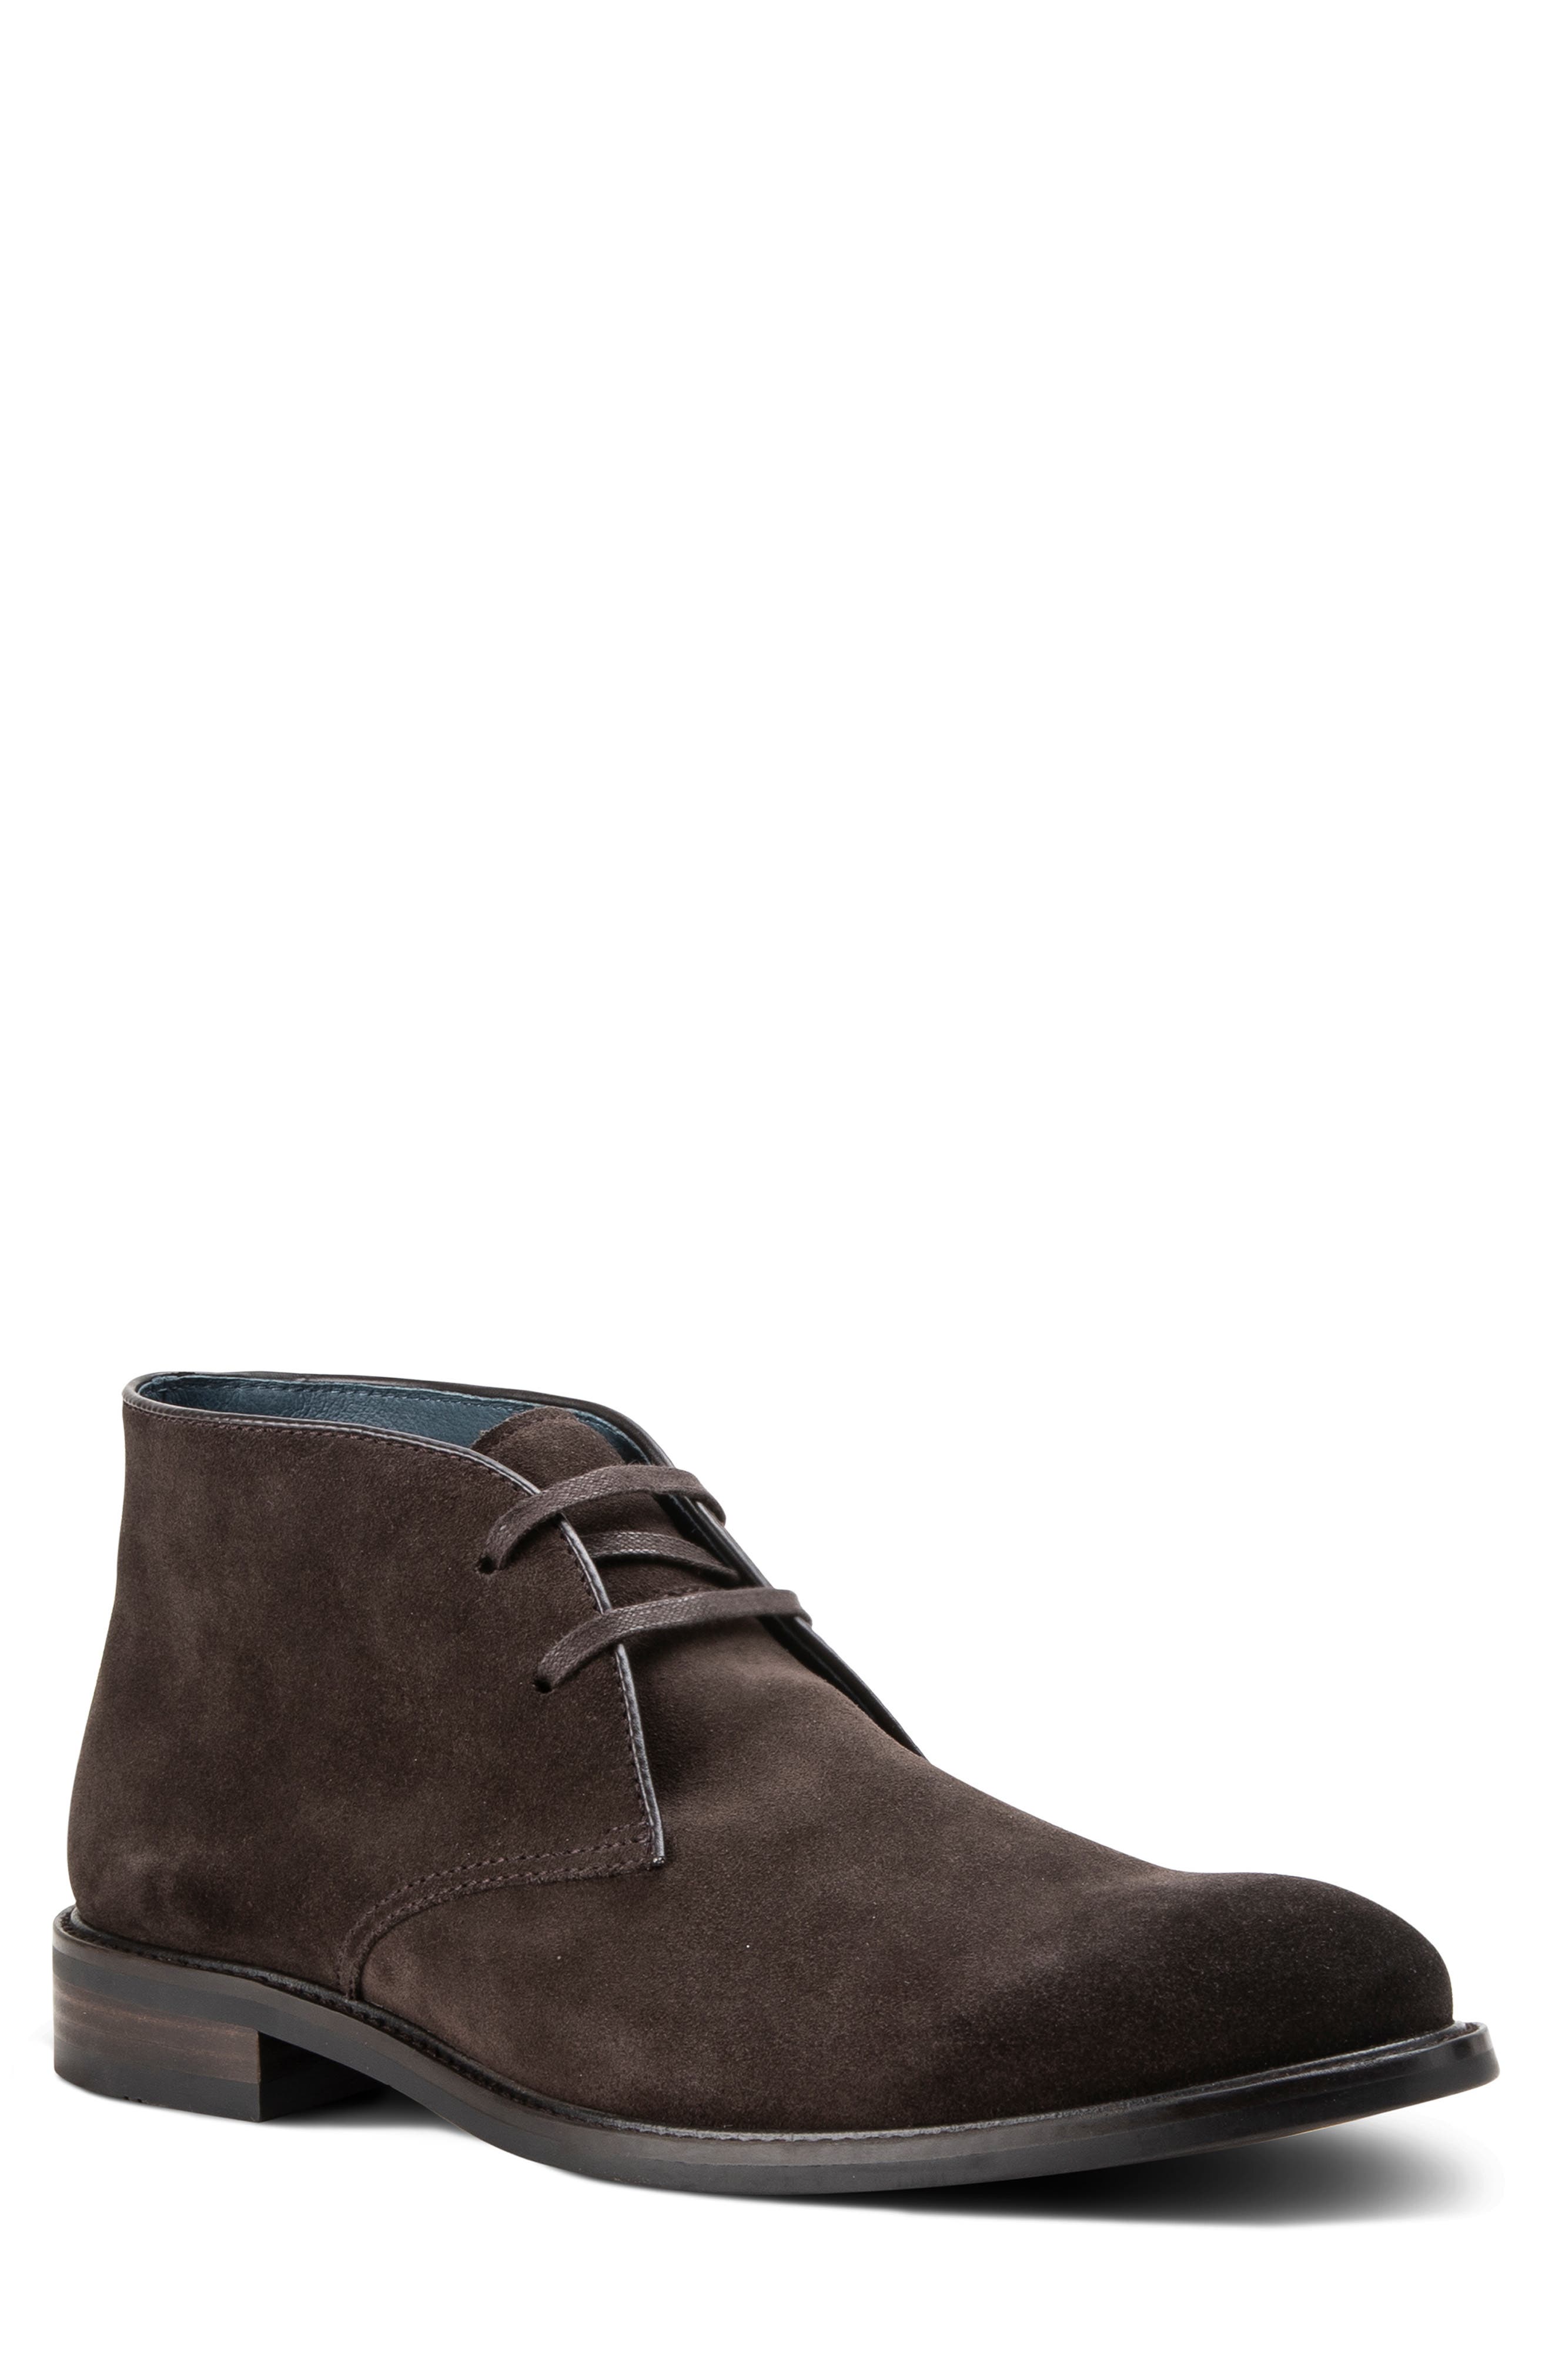 Blake Mckay Belmont Chukka Boot in Chocolate Suede at Nordstrom